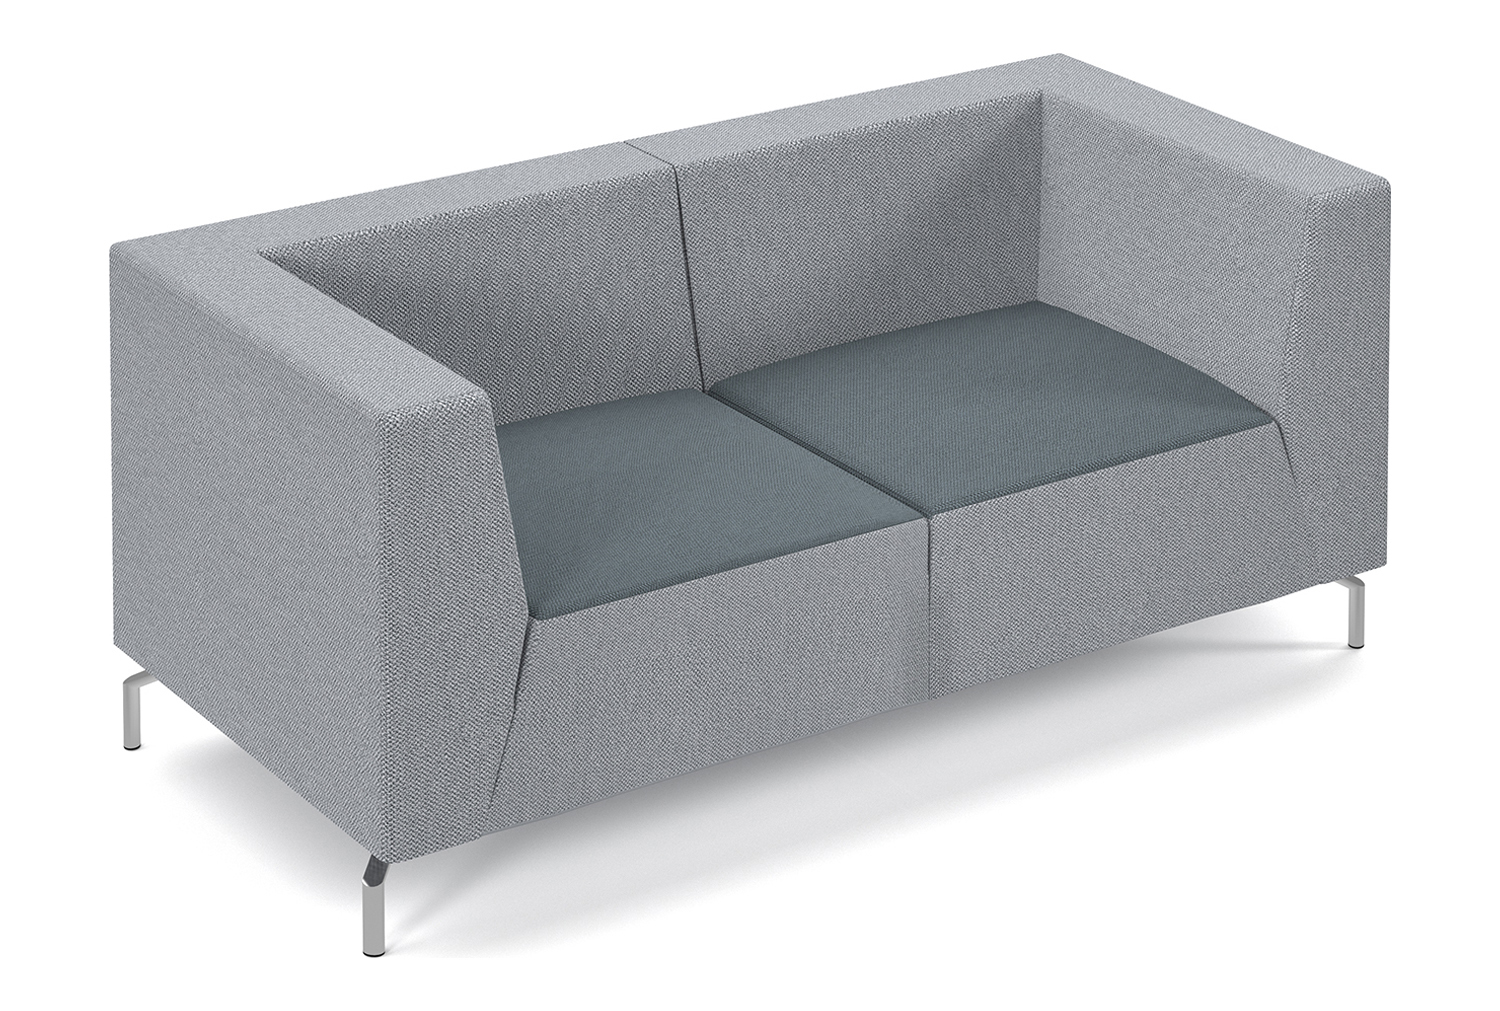 Plato 2 Tone Fabric Low Two Seater Sofa, Elapse Grey Seat/Late Grey Back